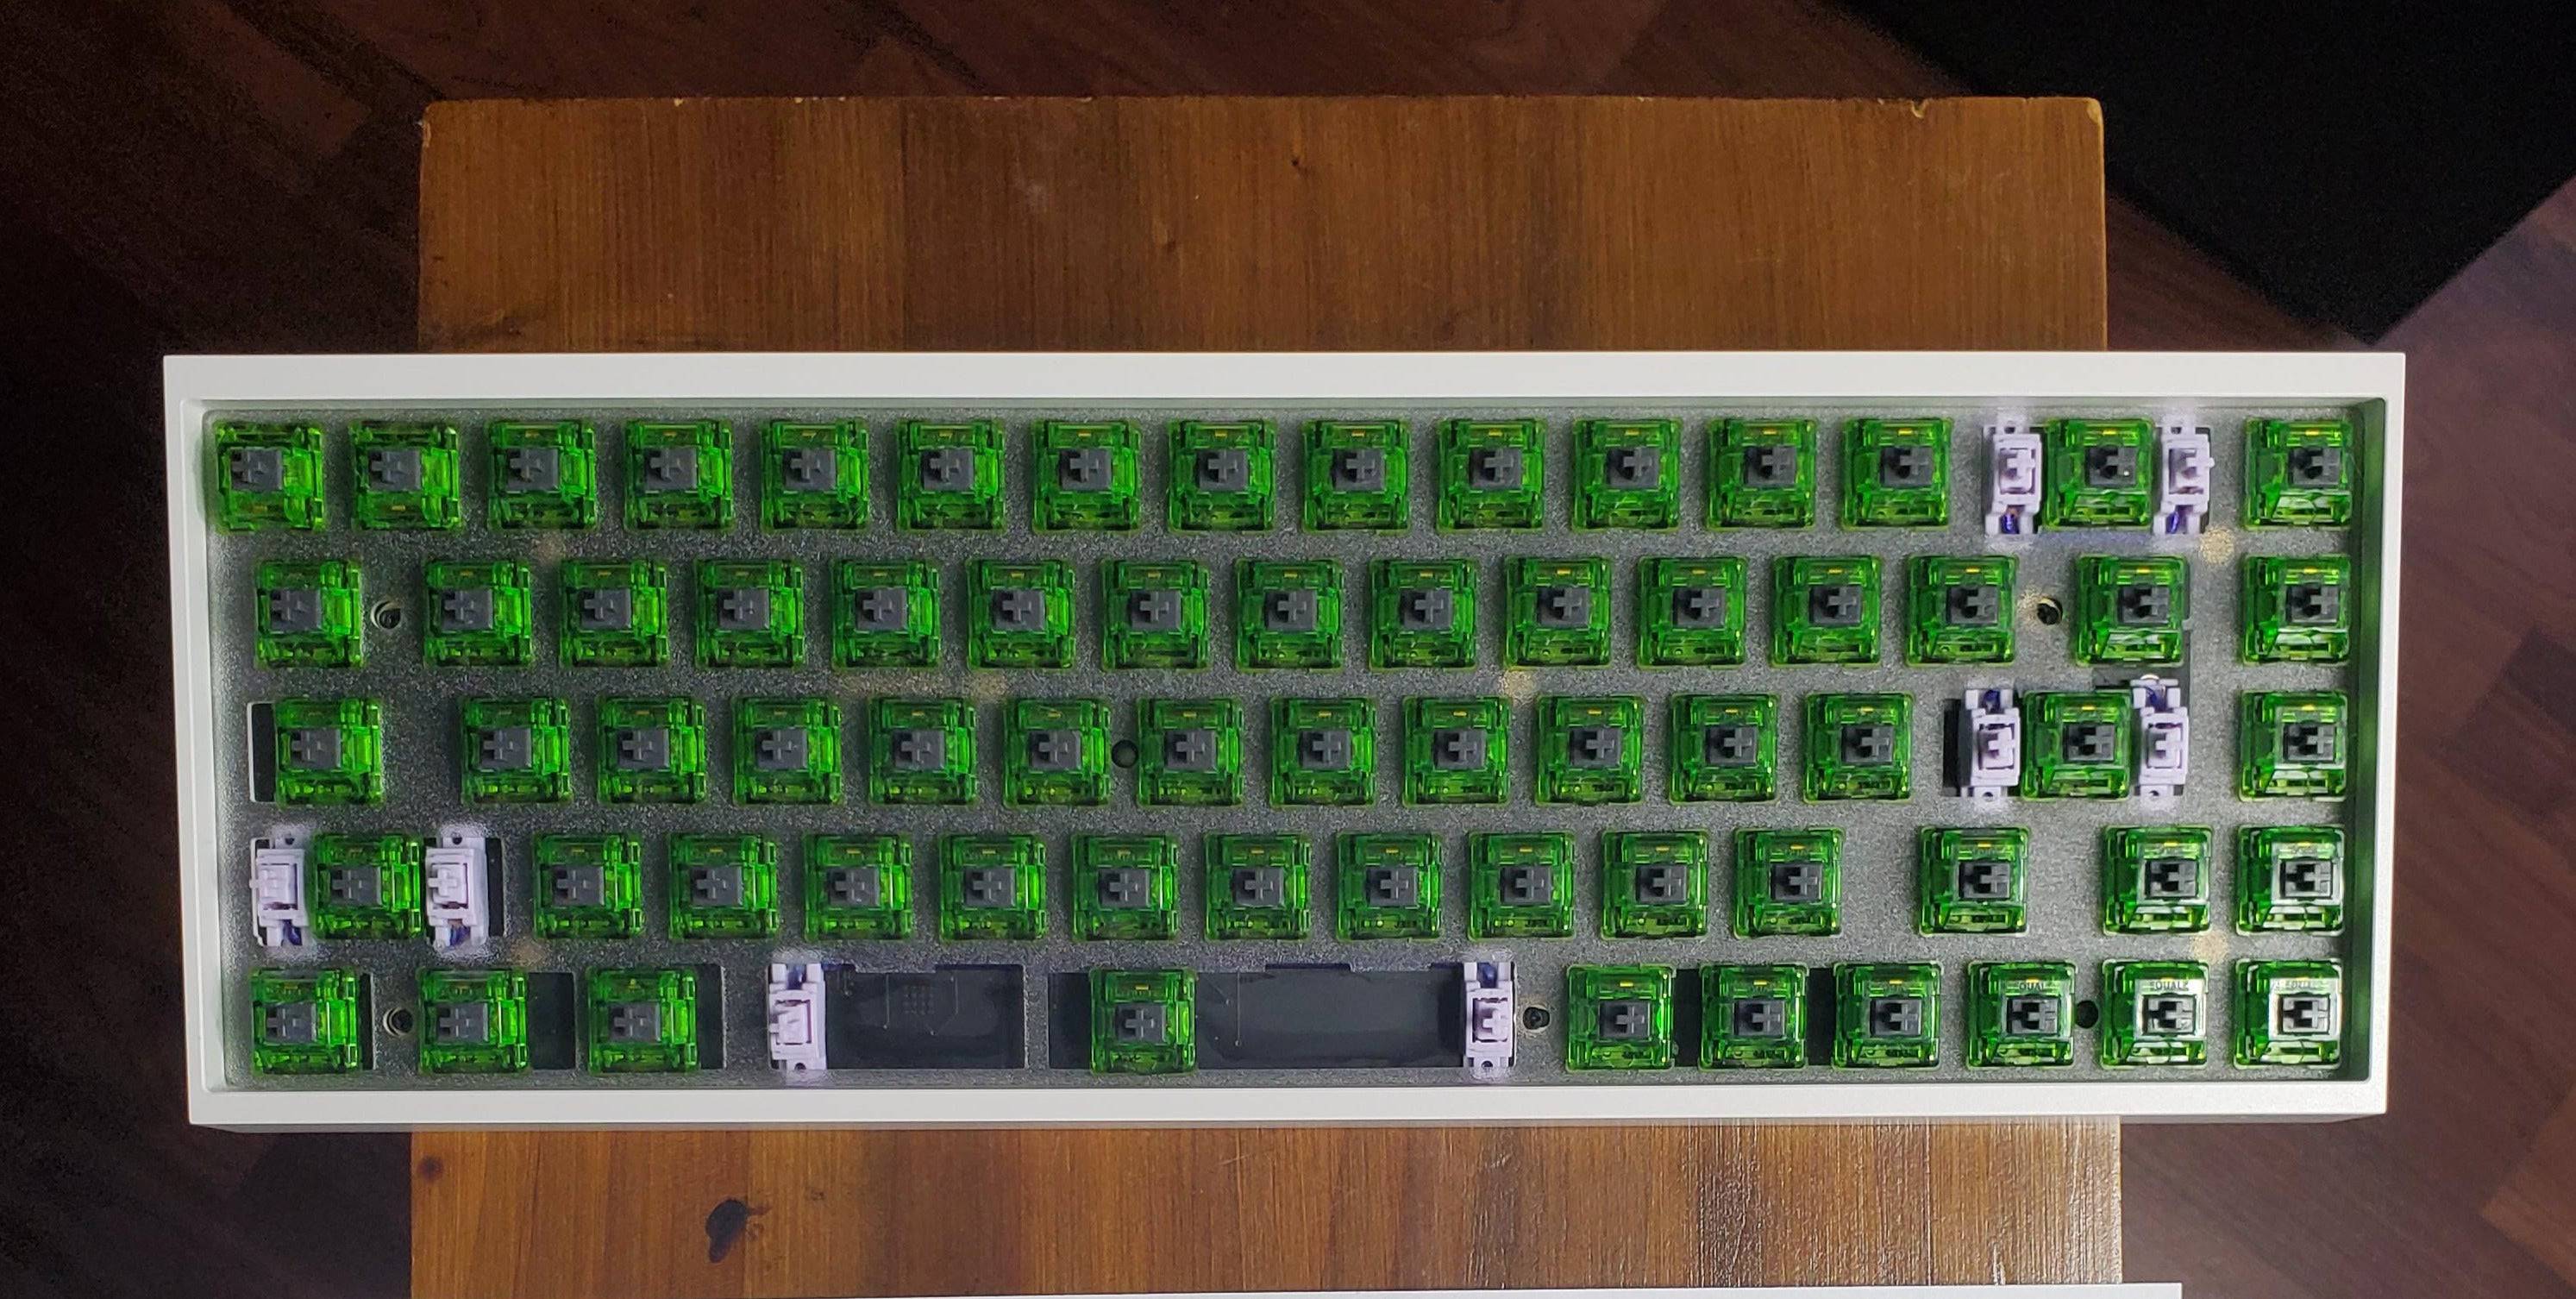 [KFA MARKETPLACE] Tofu65 E-White DIY KIt w/ Lubed/Filmed Switches & Stabs - KeebsForAll